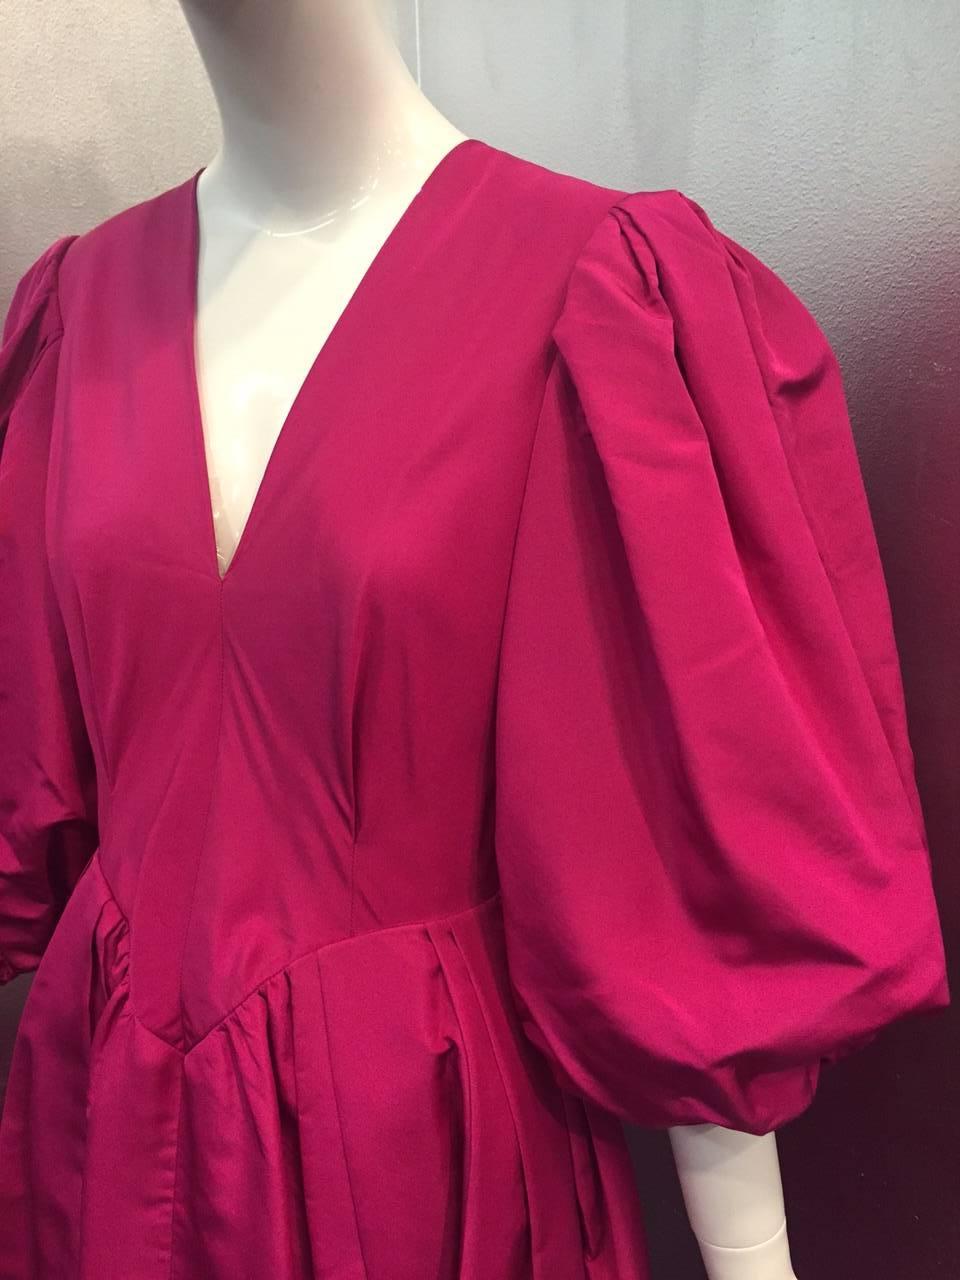 1970s Pauline Trigere Fuchsia Silk Faille Evening Gown with Balloon Sleeves  For Sale 1